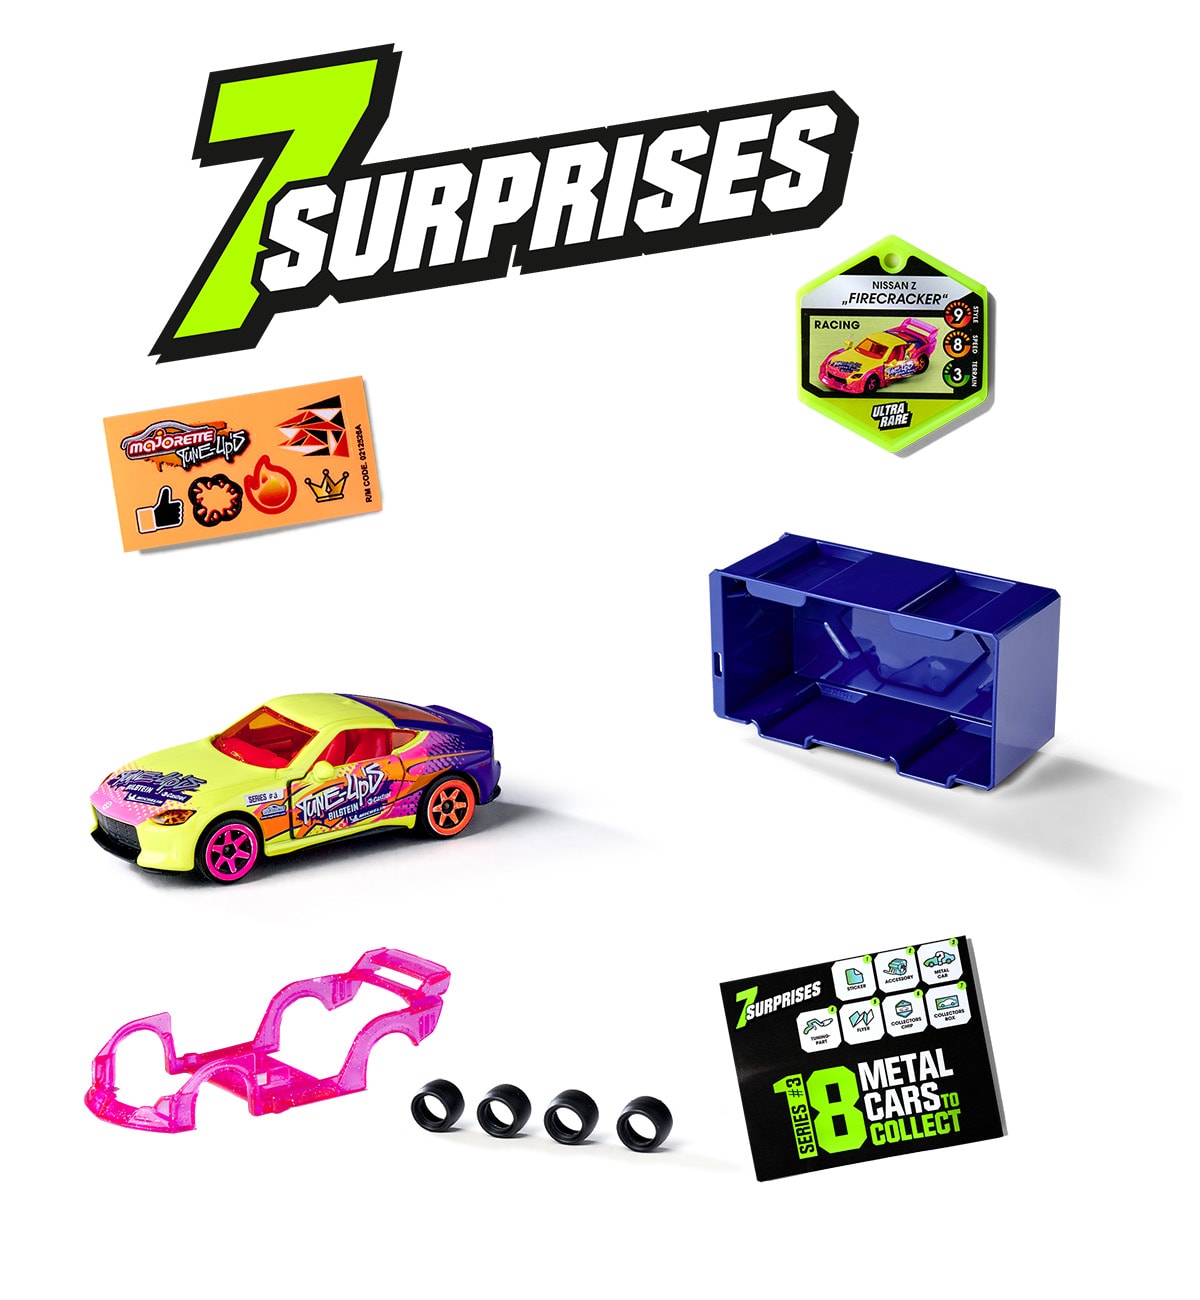 Buy Tune Ups Series 2 - set of 4 with 28 surprises, 4 of 18 cars